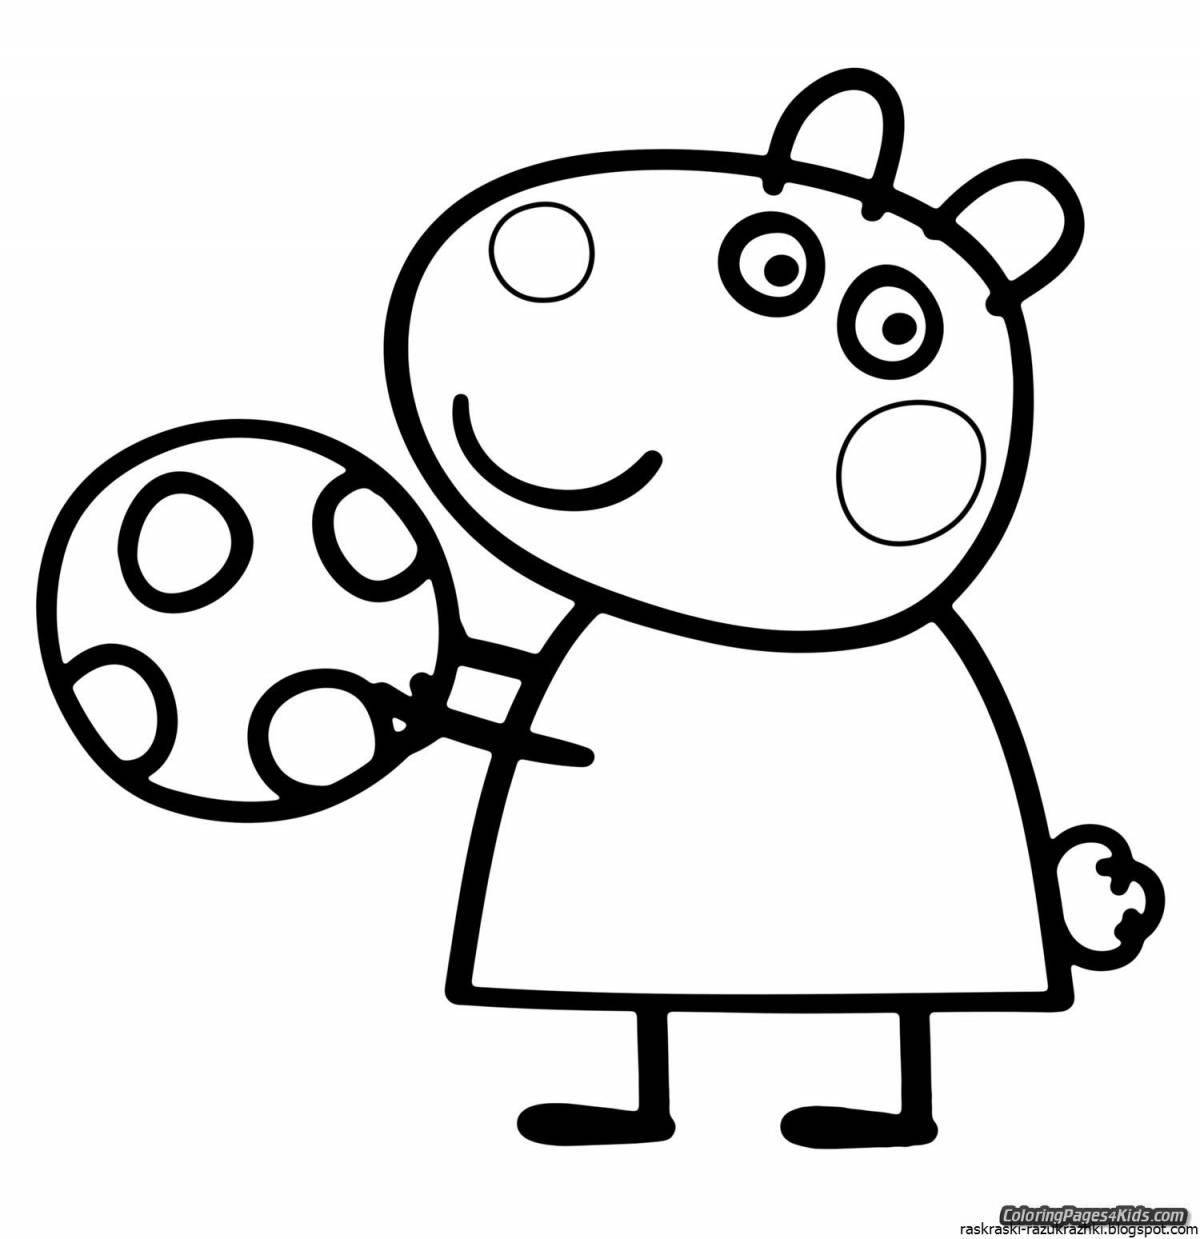 Irresistible peppa pig coloring pages for kids